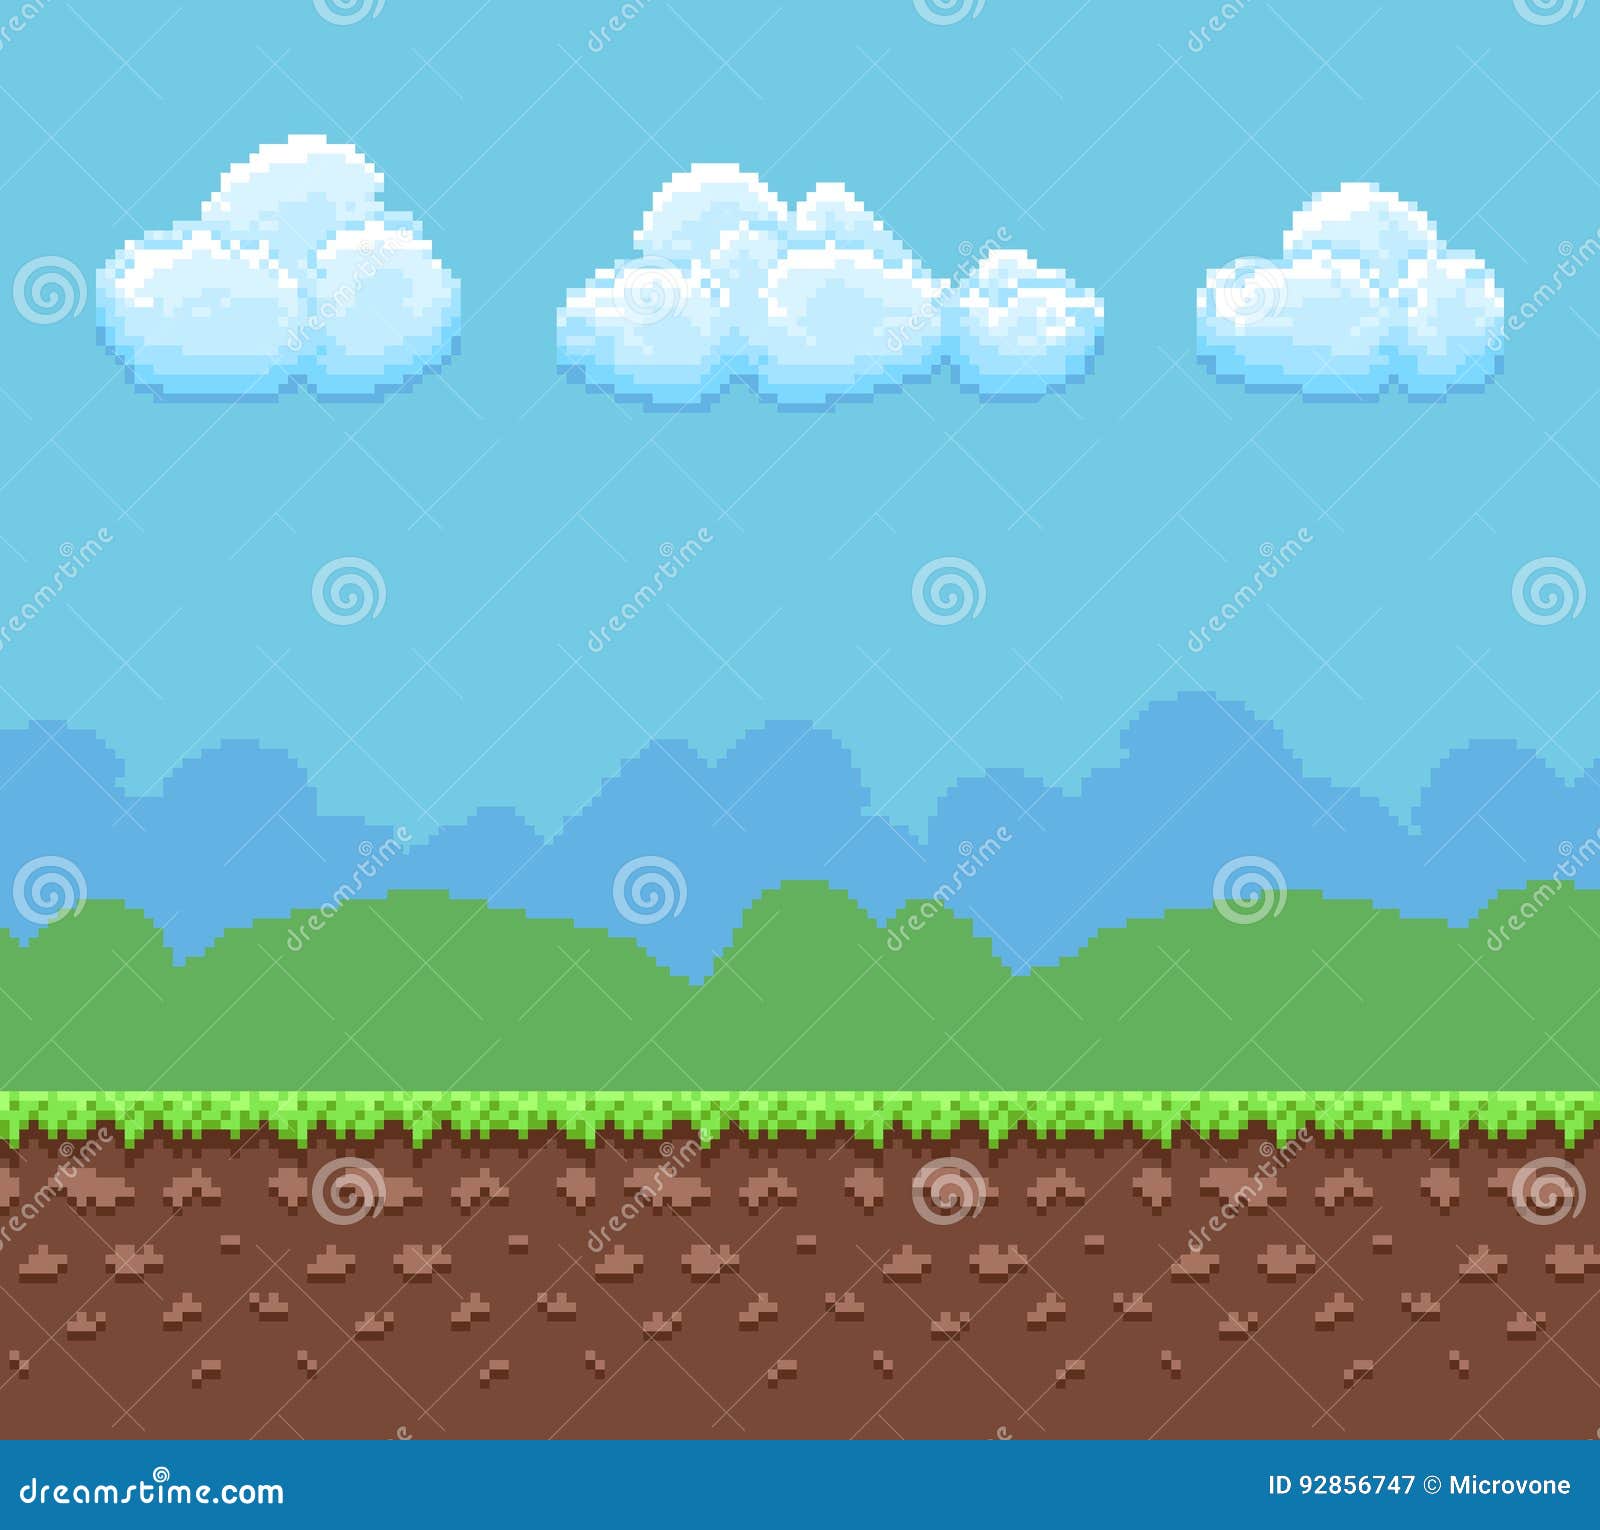 Pixel 8bit Game Vector Background with Ground and Cloudy Sky Panorama ...